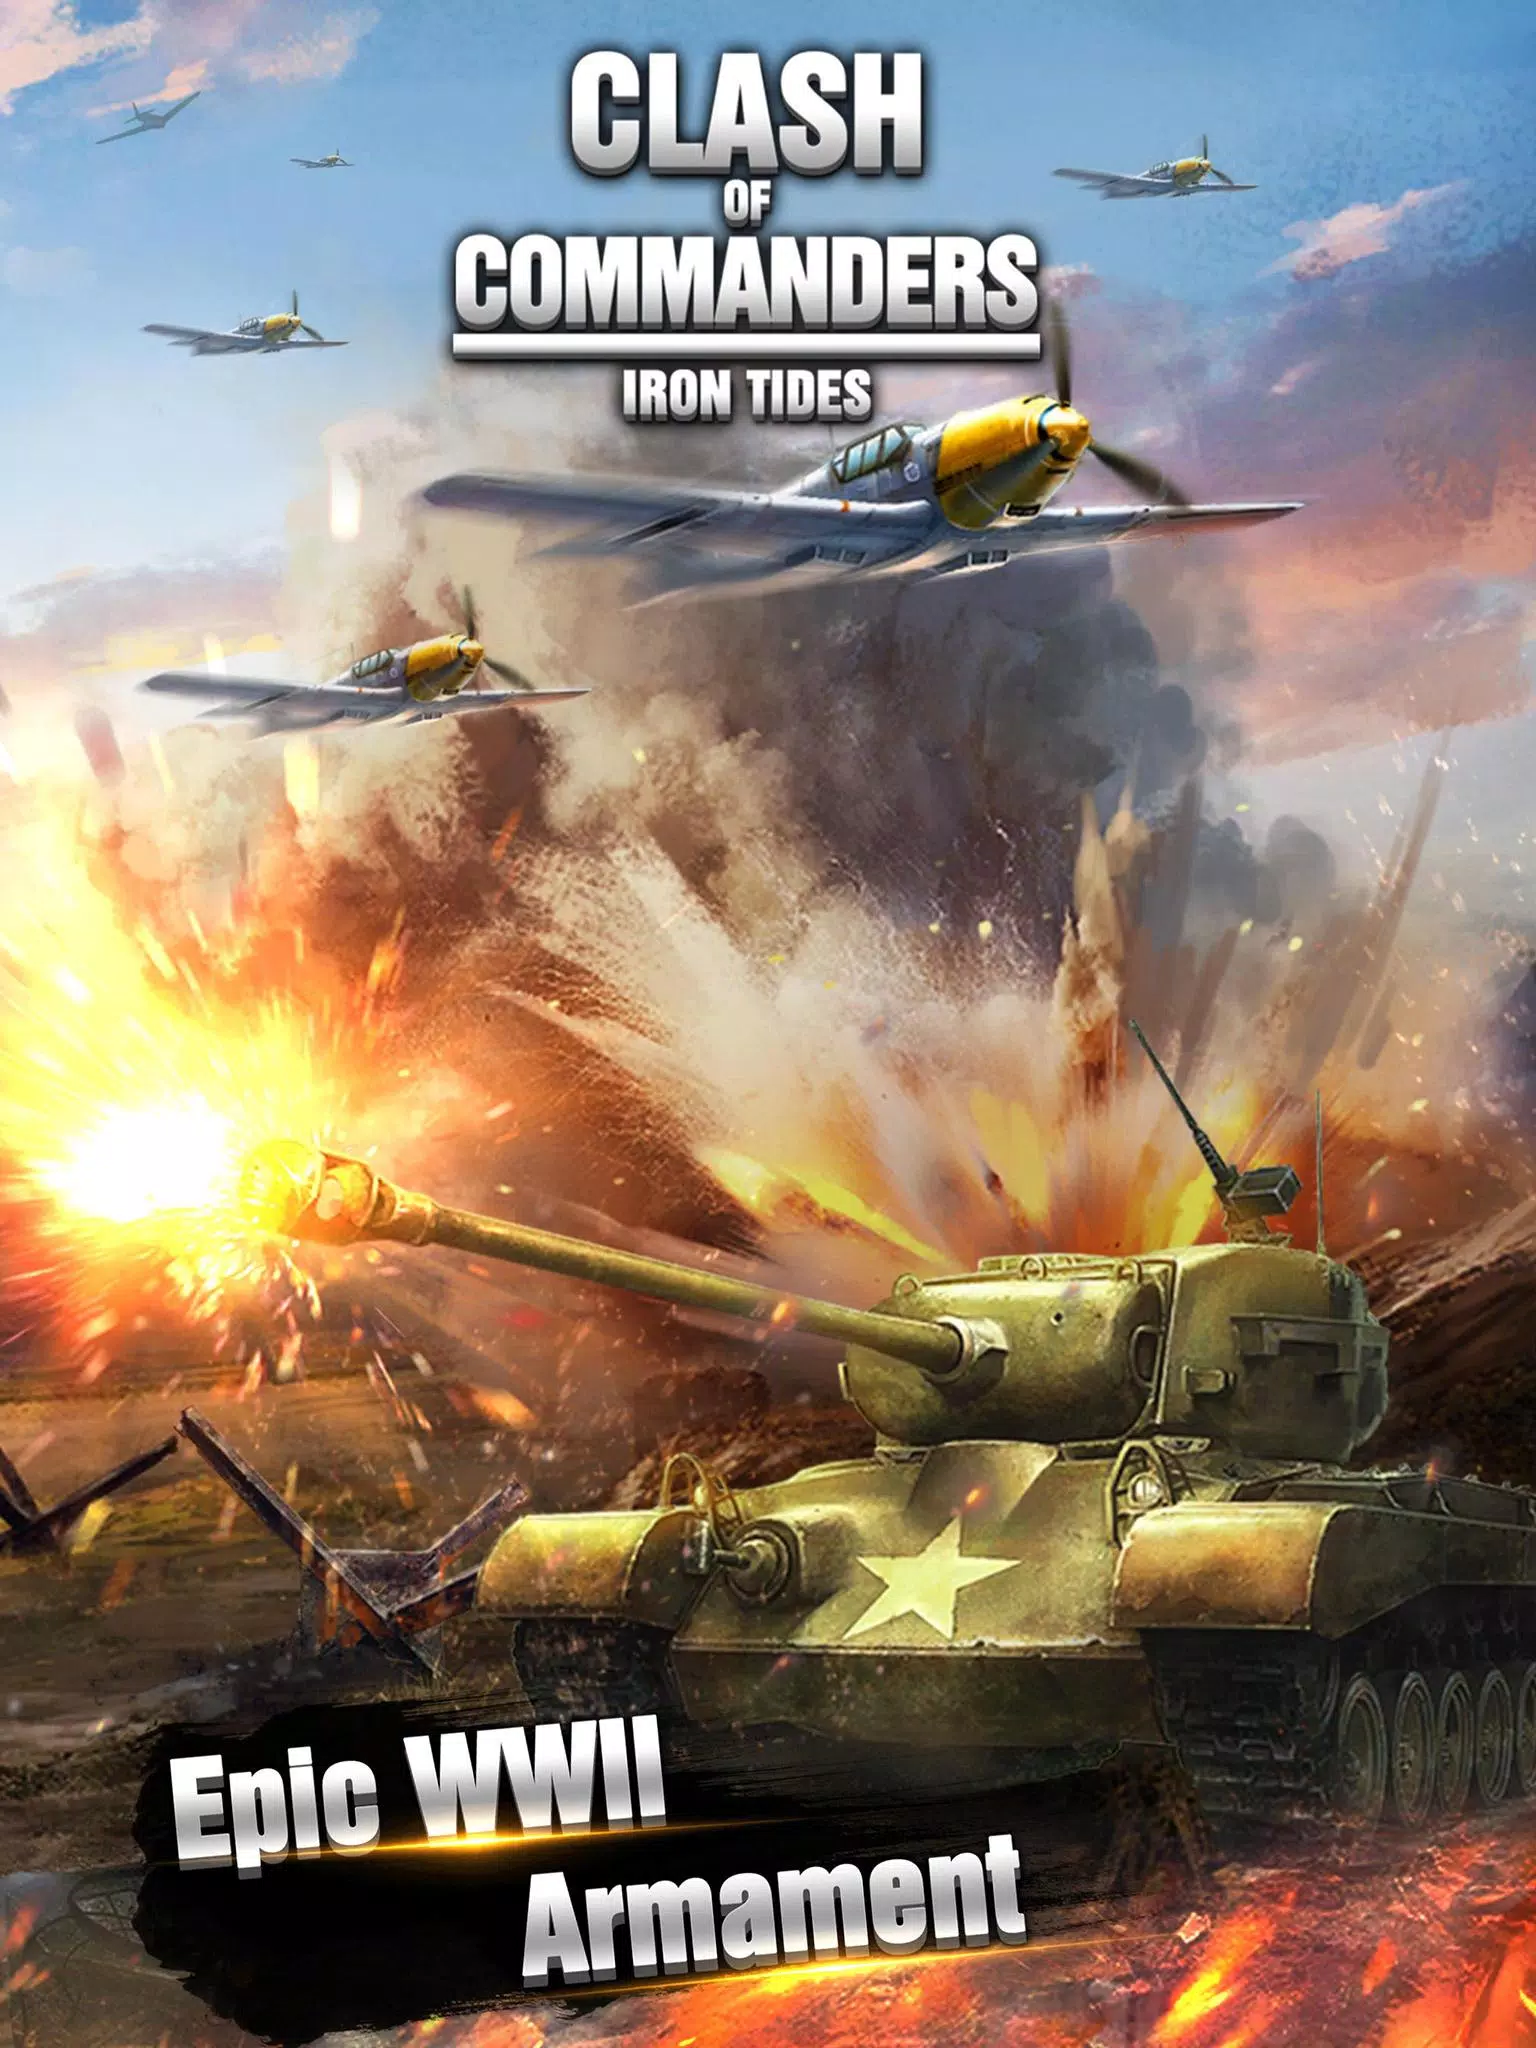 Clash of Commanders-Iron Tides for Android - APK Download